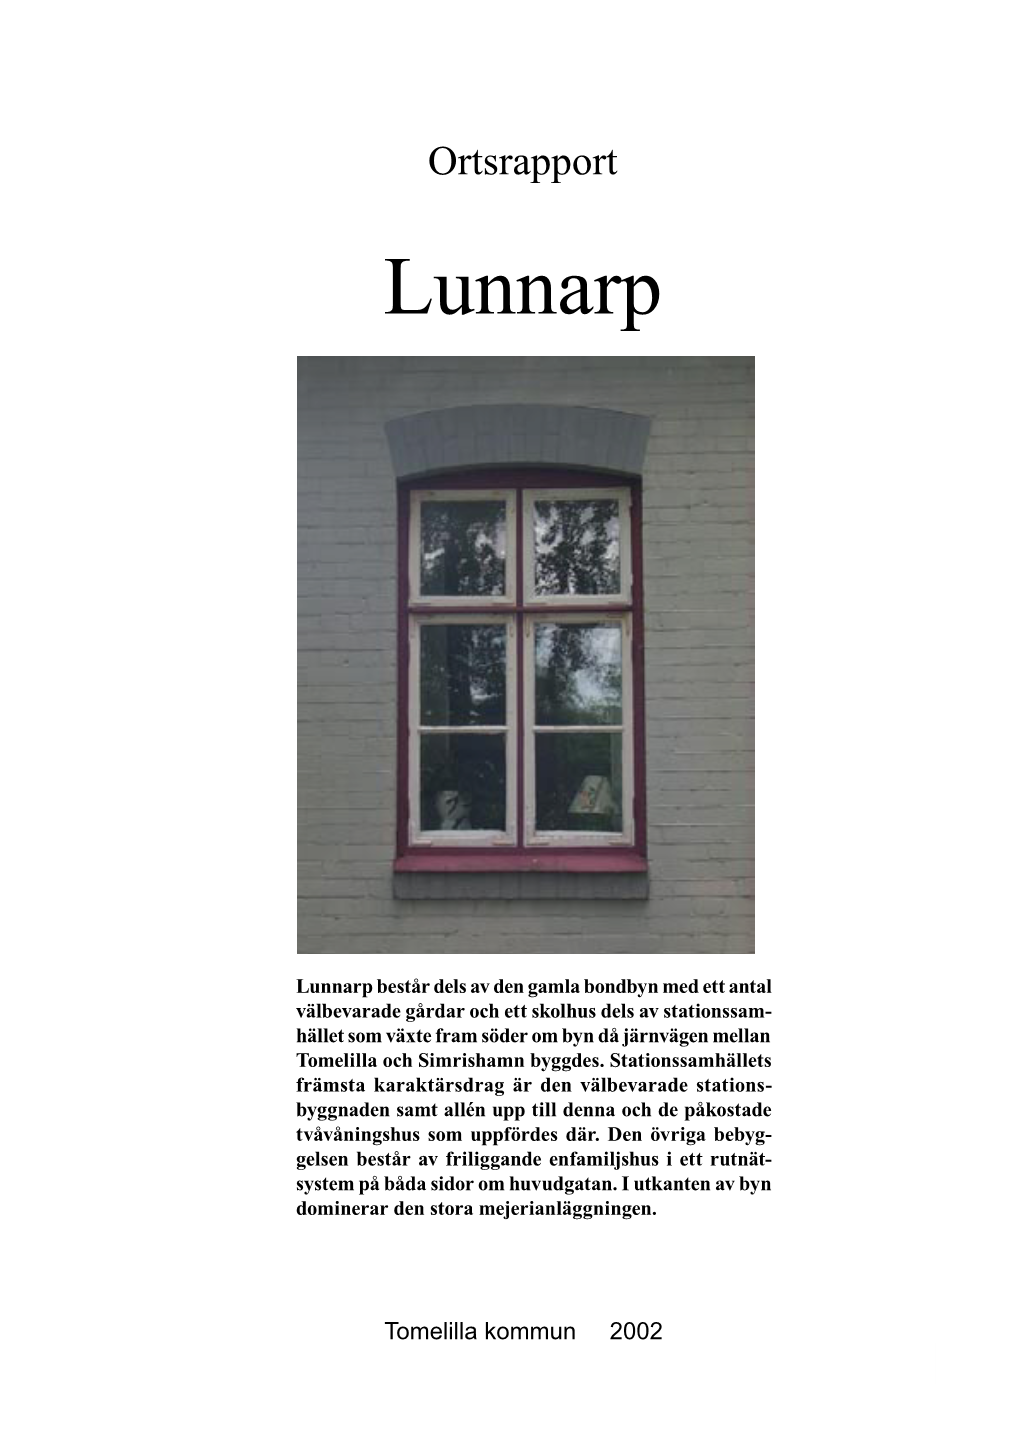 Ortsrapport Lunnarp